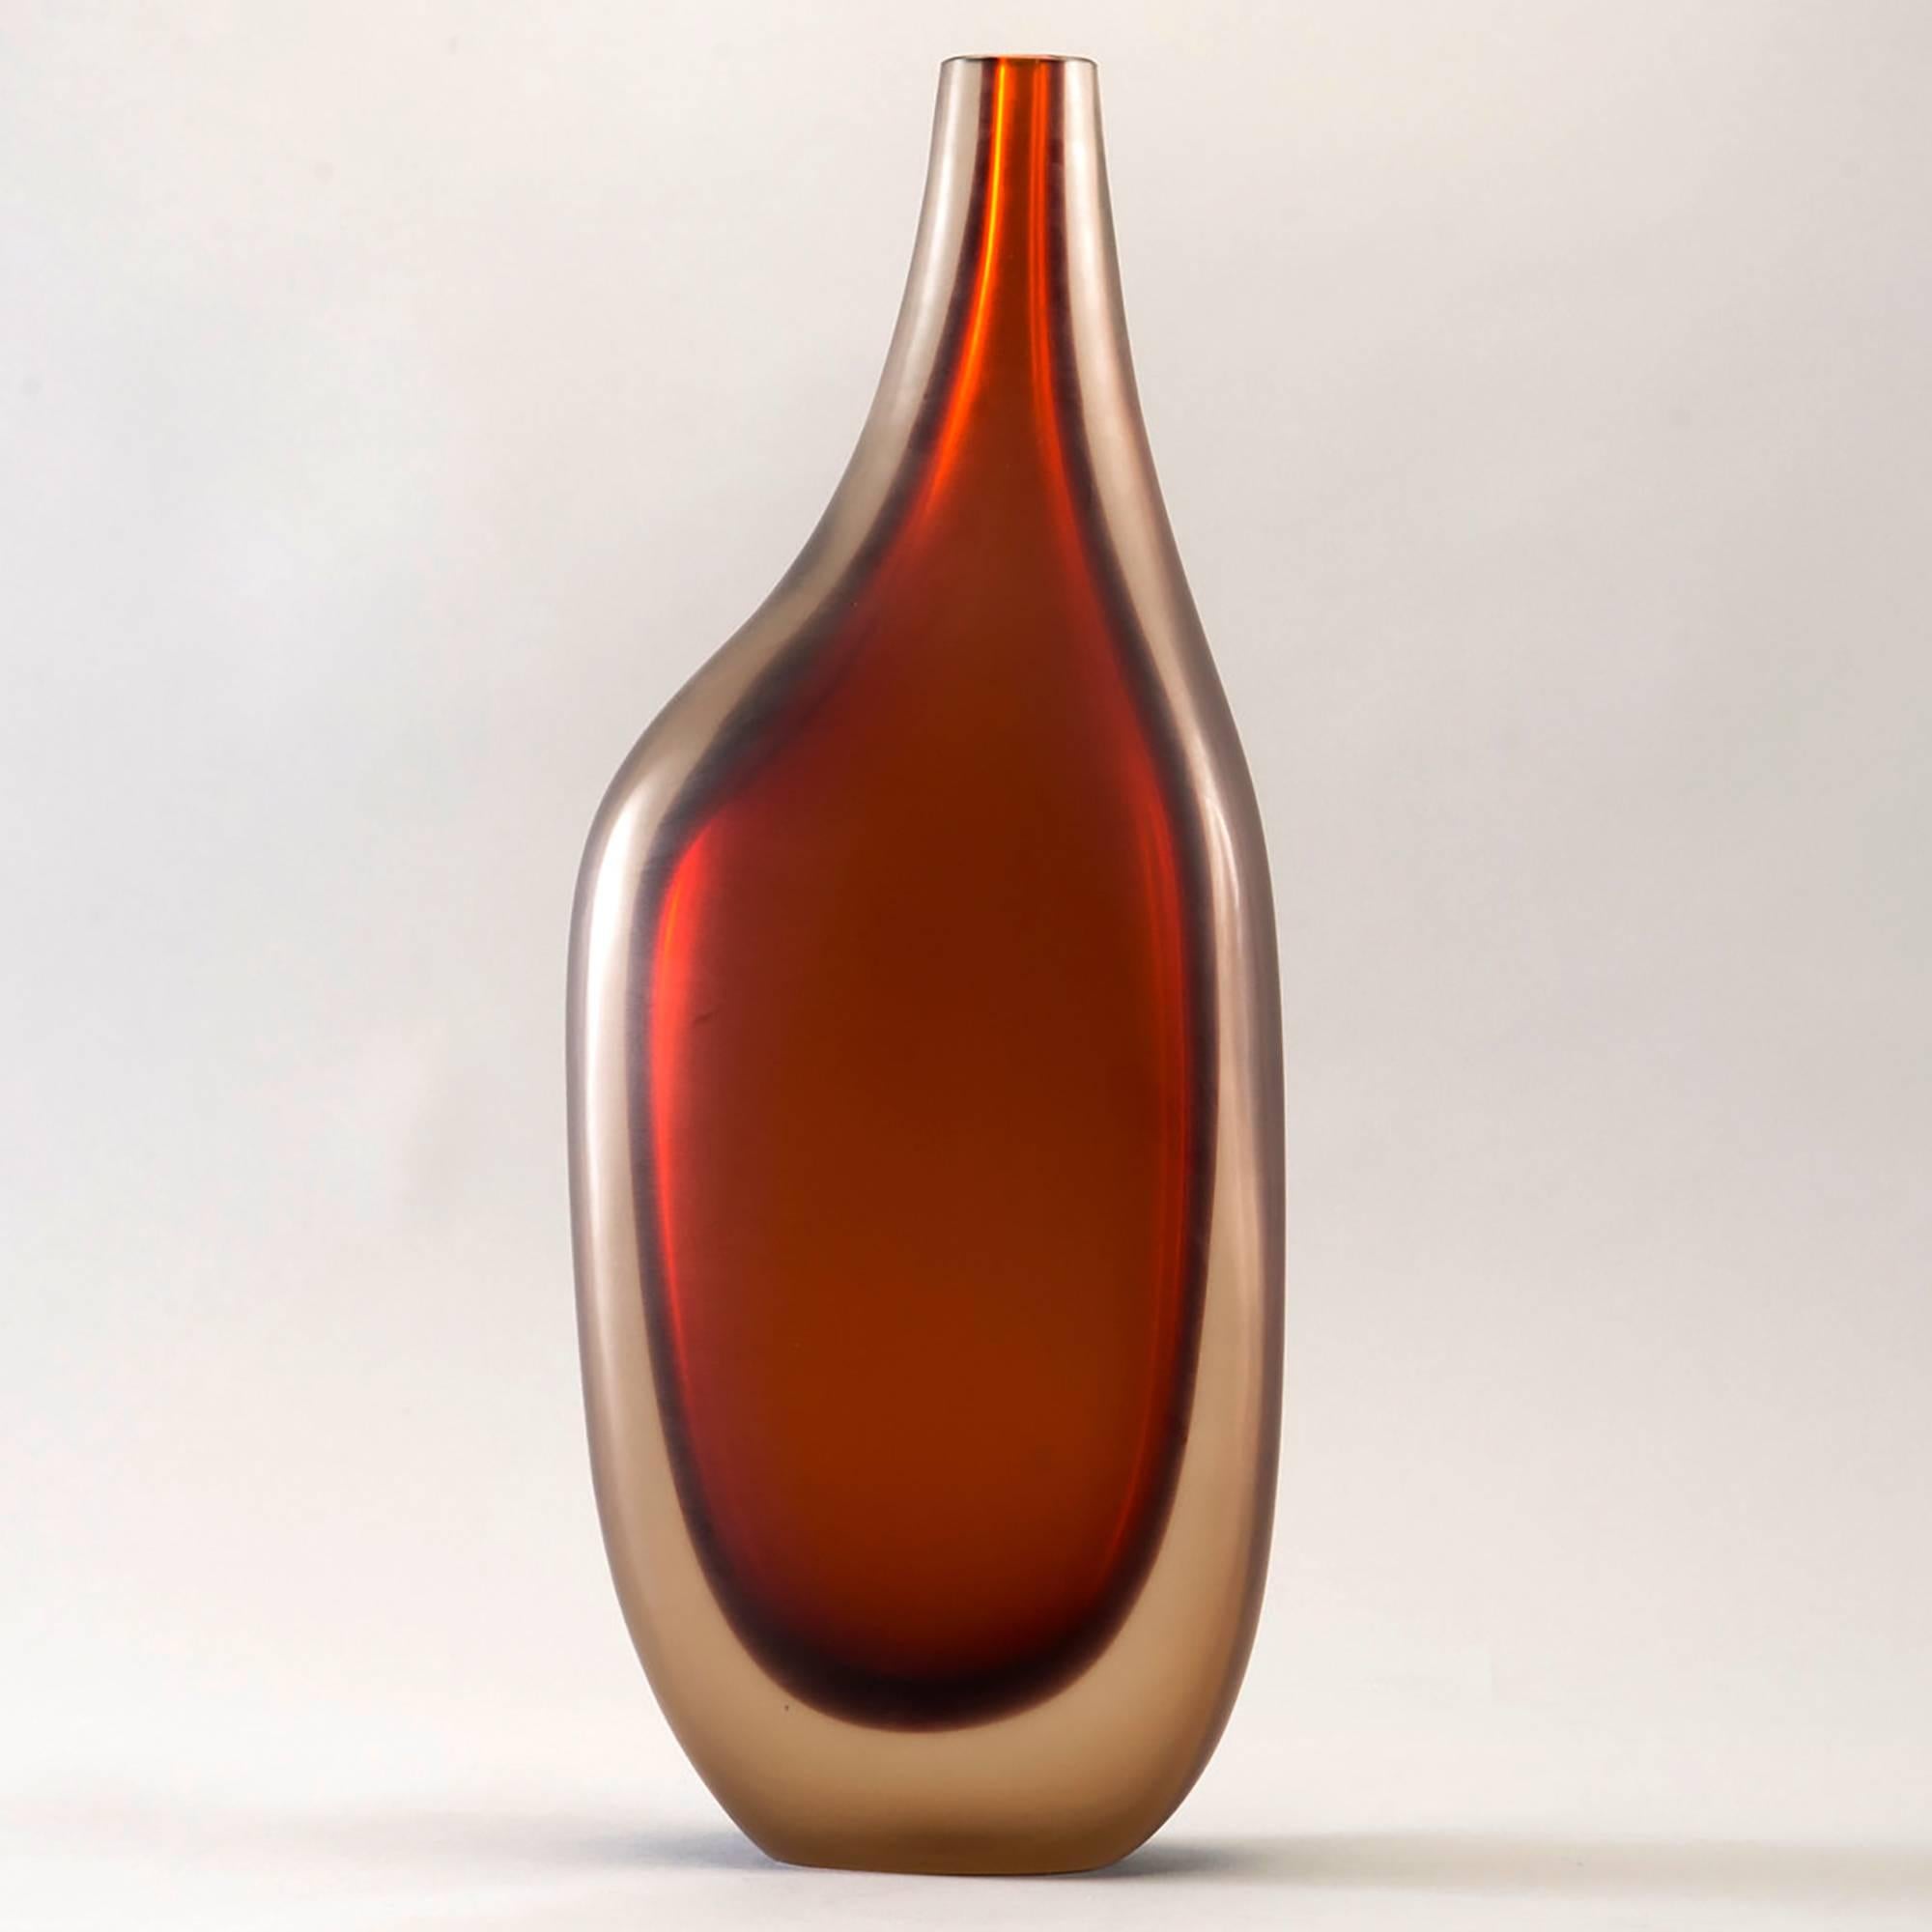 Limited edition handcrafted vase in rich rust red colored cased glass, circa 2017. Designed by Ivan Baj at Arcade, this piece has a sensual biomorphic shape and is signed by the artist and numbered 26 of 33. New condition with no flaws found.
   